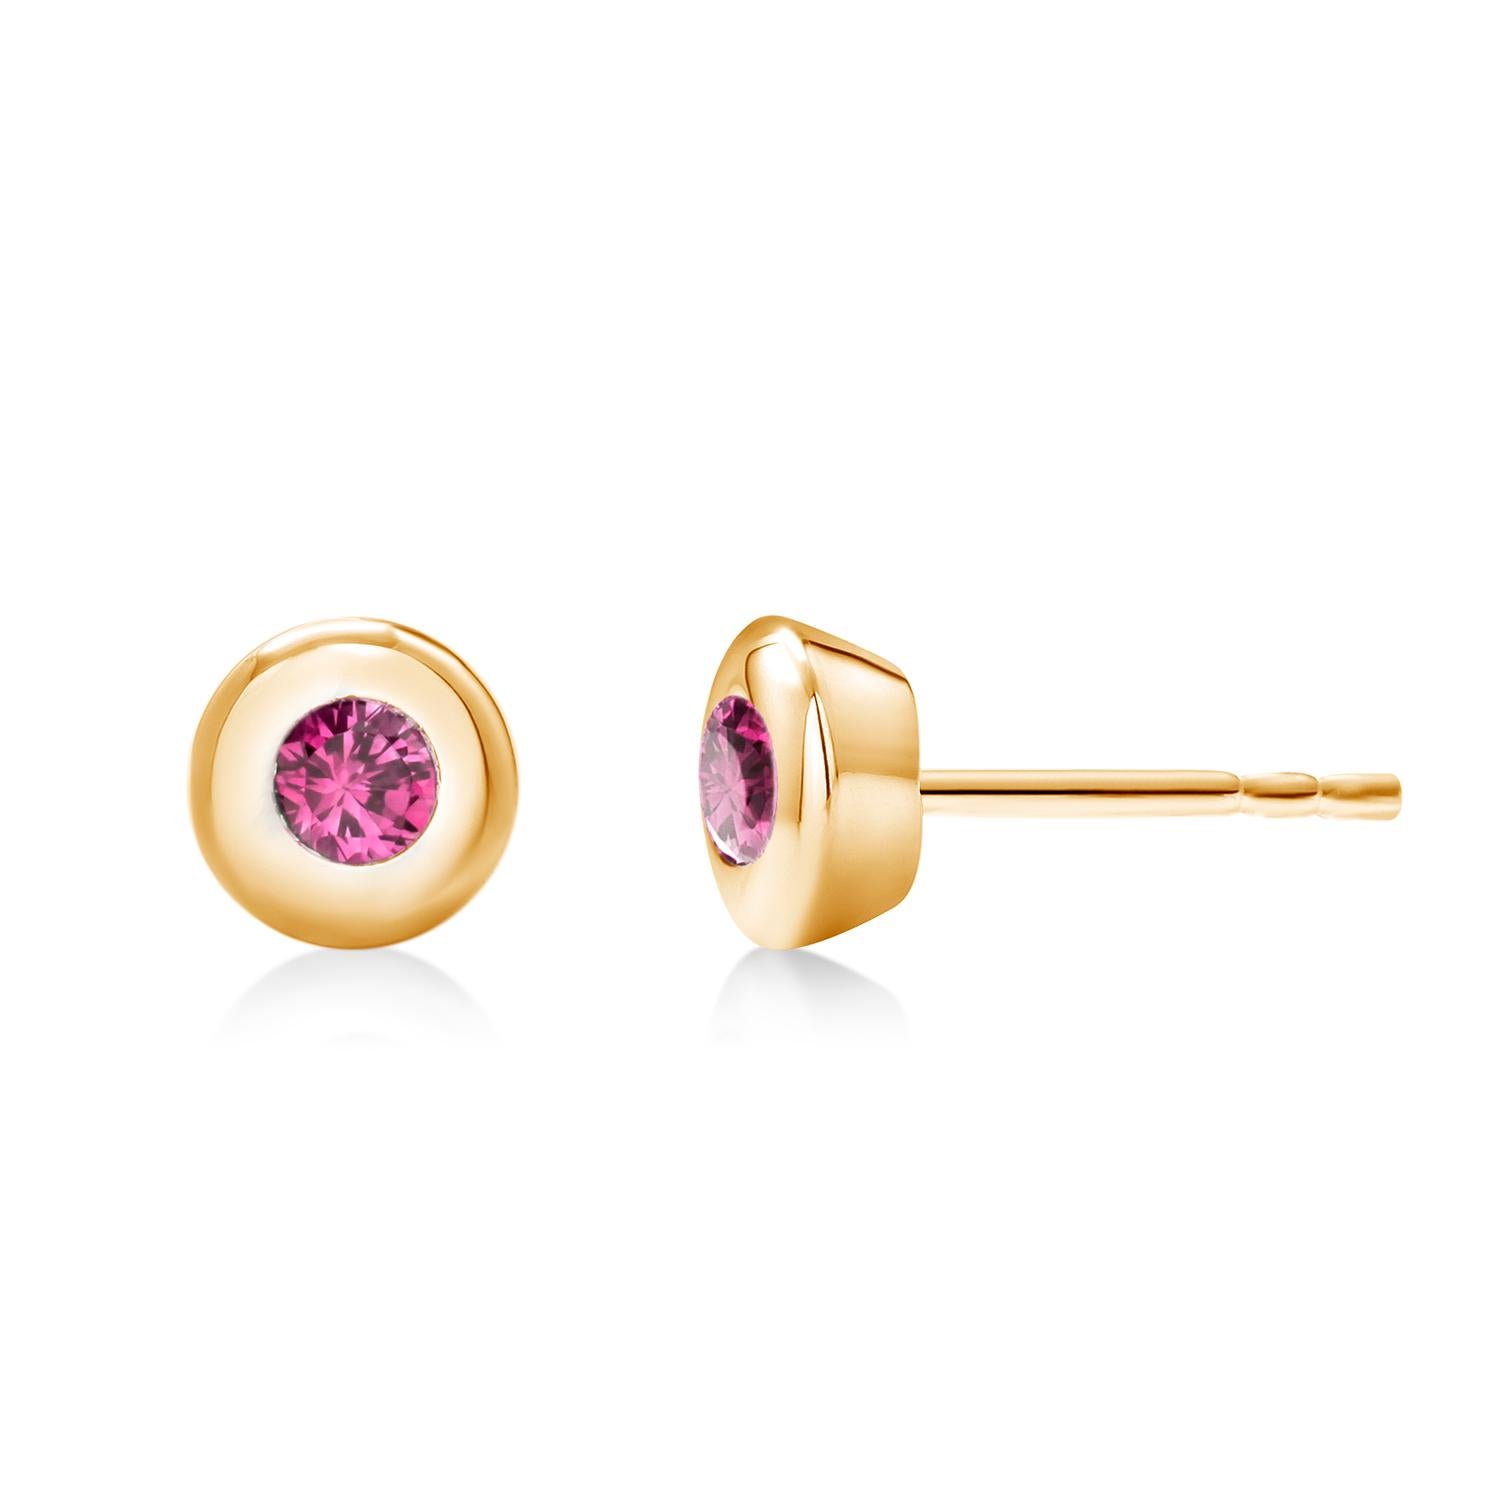 14 karat yellow gold round ruby stud earrings
Two round ruby measuring 3 millimeters each 
Ruby hue tone color is fuchsia red
Rubies weighing 0.30   
New Earrings
New Earrings
Handmade in the USA
The 14 karat gold earrings are attached to a straight